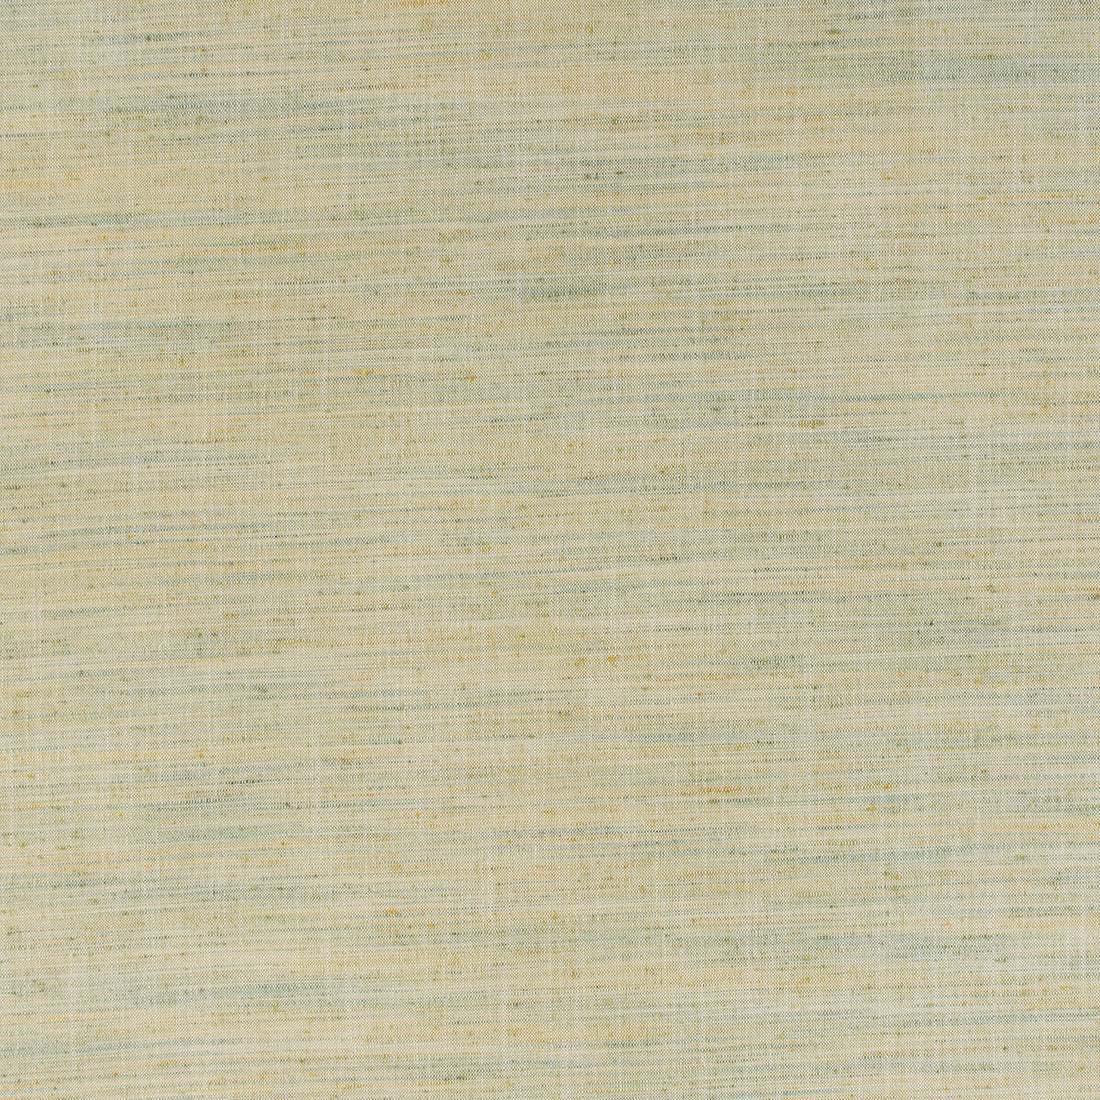 Groundcover fabric in pear color - pattern 35911.13.0 - by Kravet Design in the Barbara Barry Home Midsummer collection